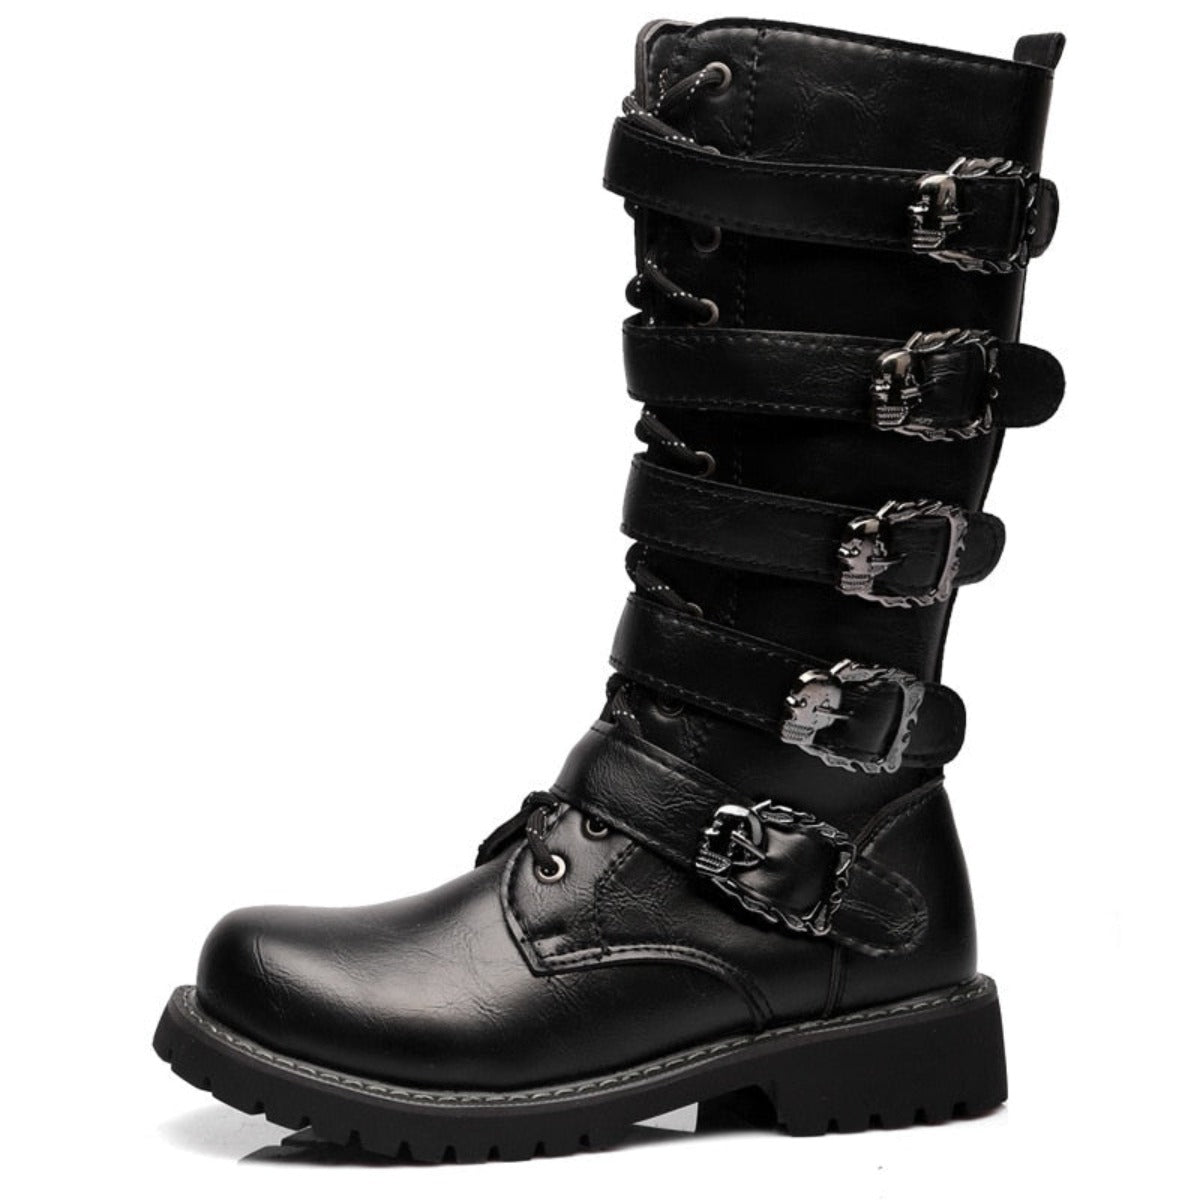 A pair of Mid-Calf Leather Motorcycle Riding Boots with a comfortable fit and buckles.